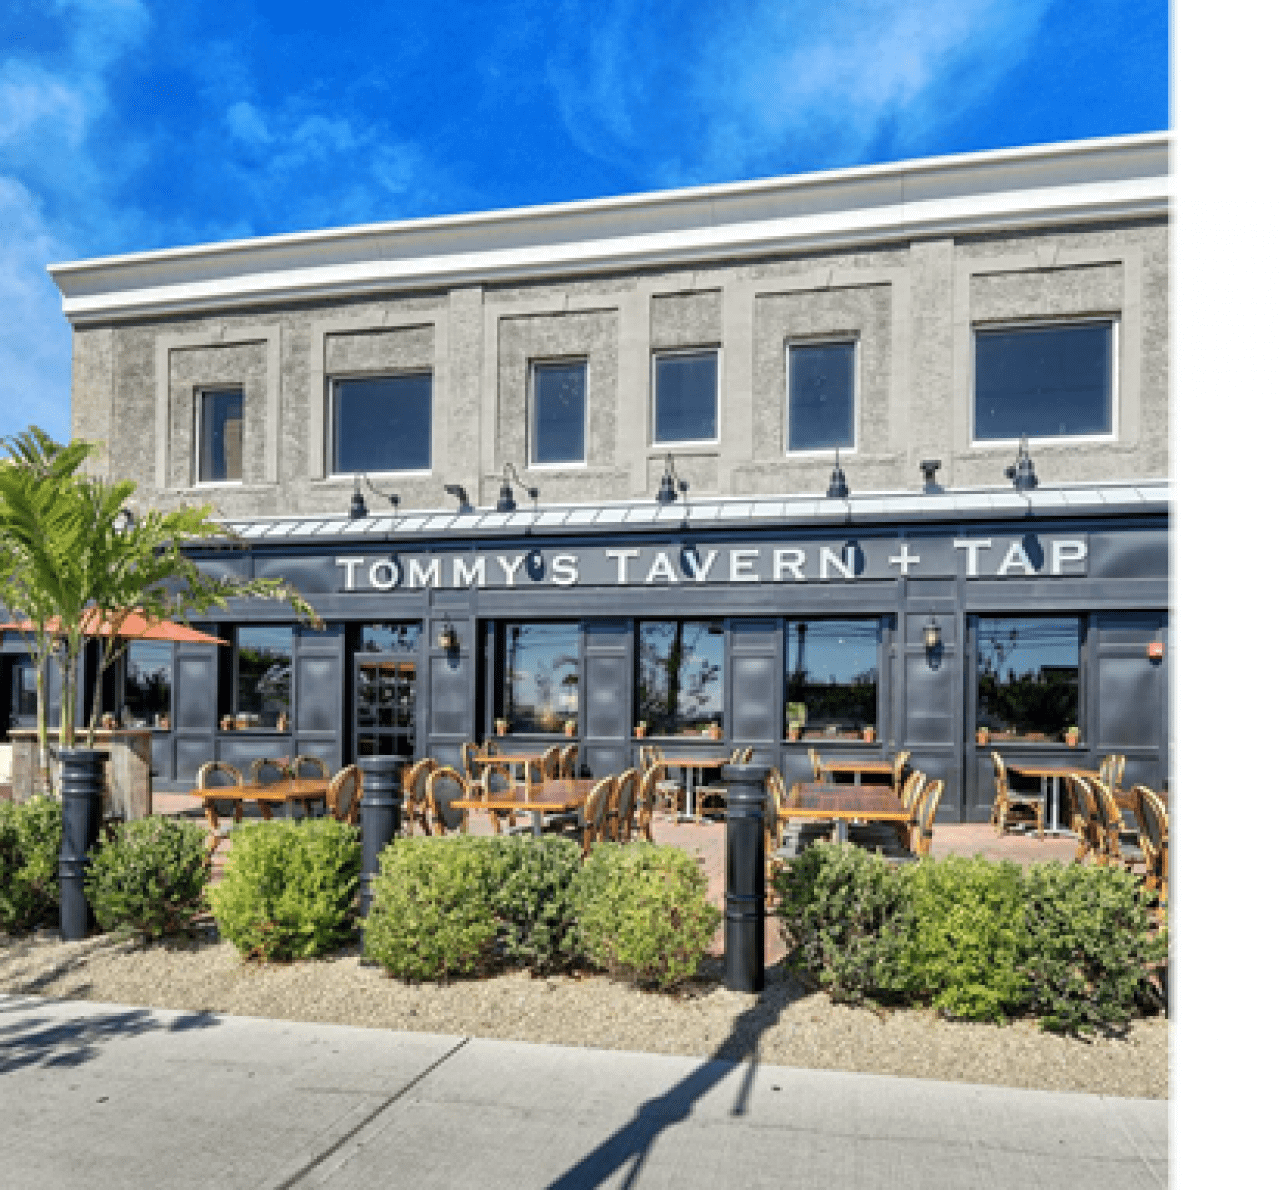 Tommys Tavern + Tap